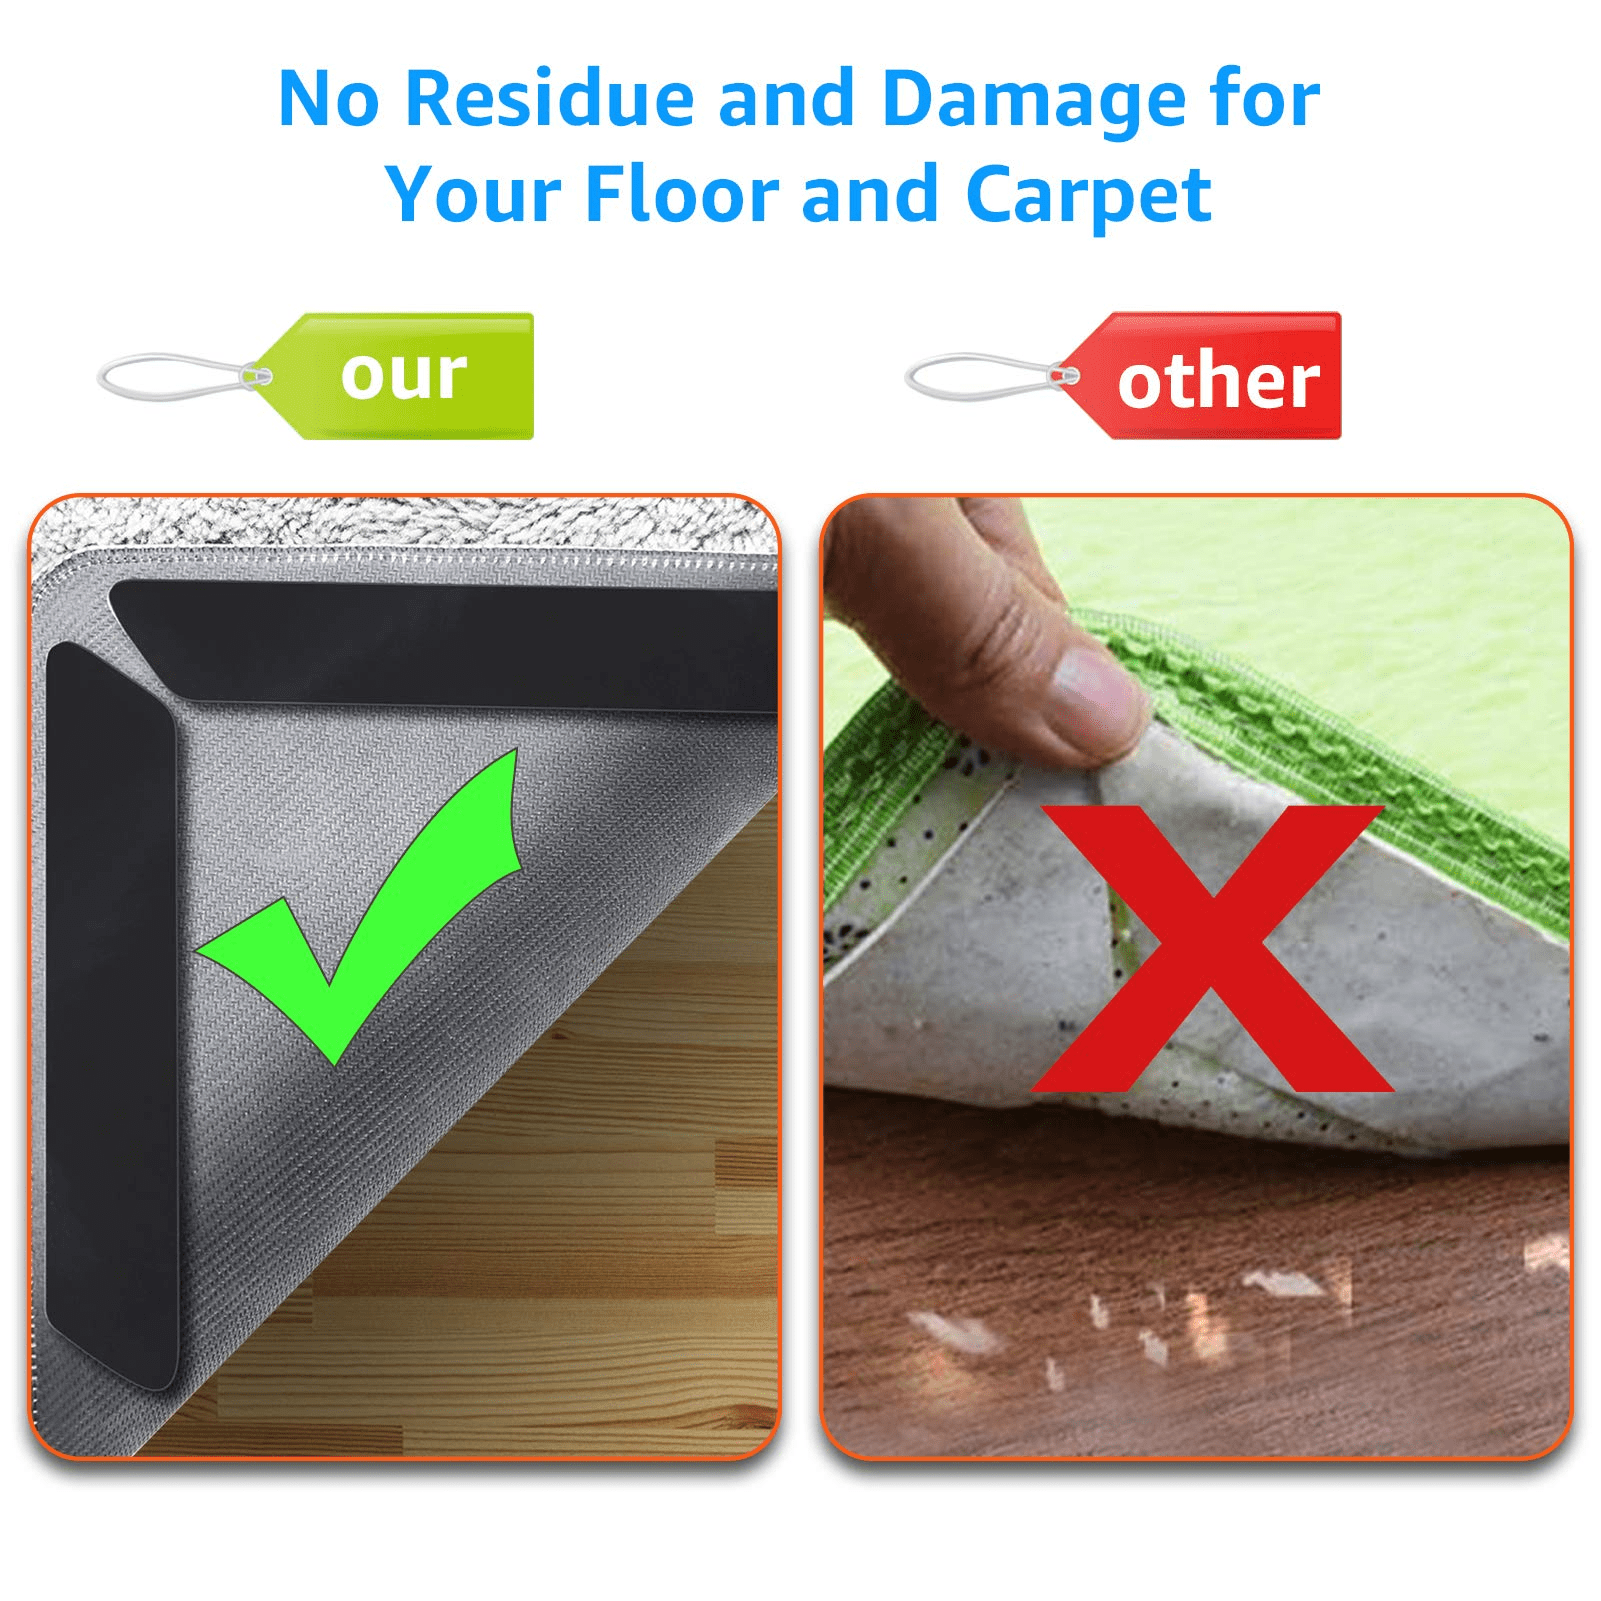 Rabenda 12 Pcs Grippers for Rugs, Non Slip Rug Pads for Hardwood Floors and tiles, Reusable and Washable Rug Tape for Area Rugs, Dual Sided Adhesive R